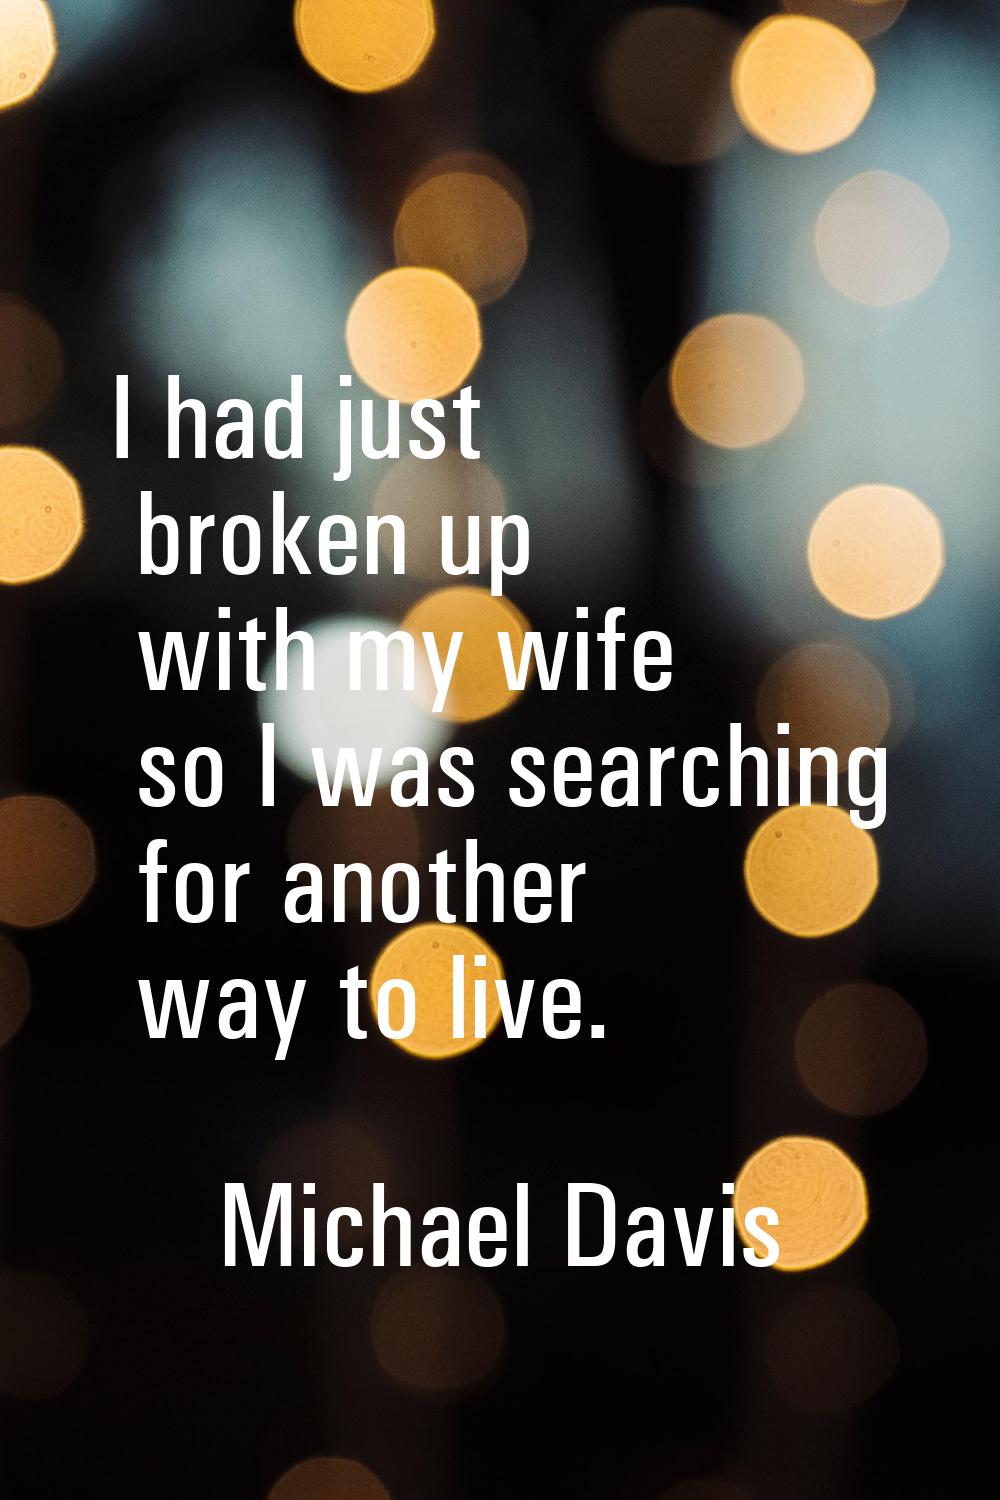 I had just broken up with my wife so I was searching for another way to live.